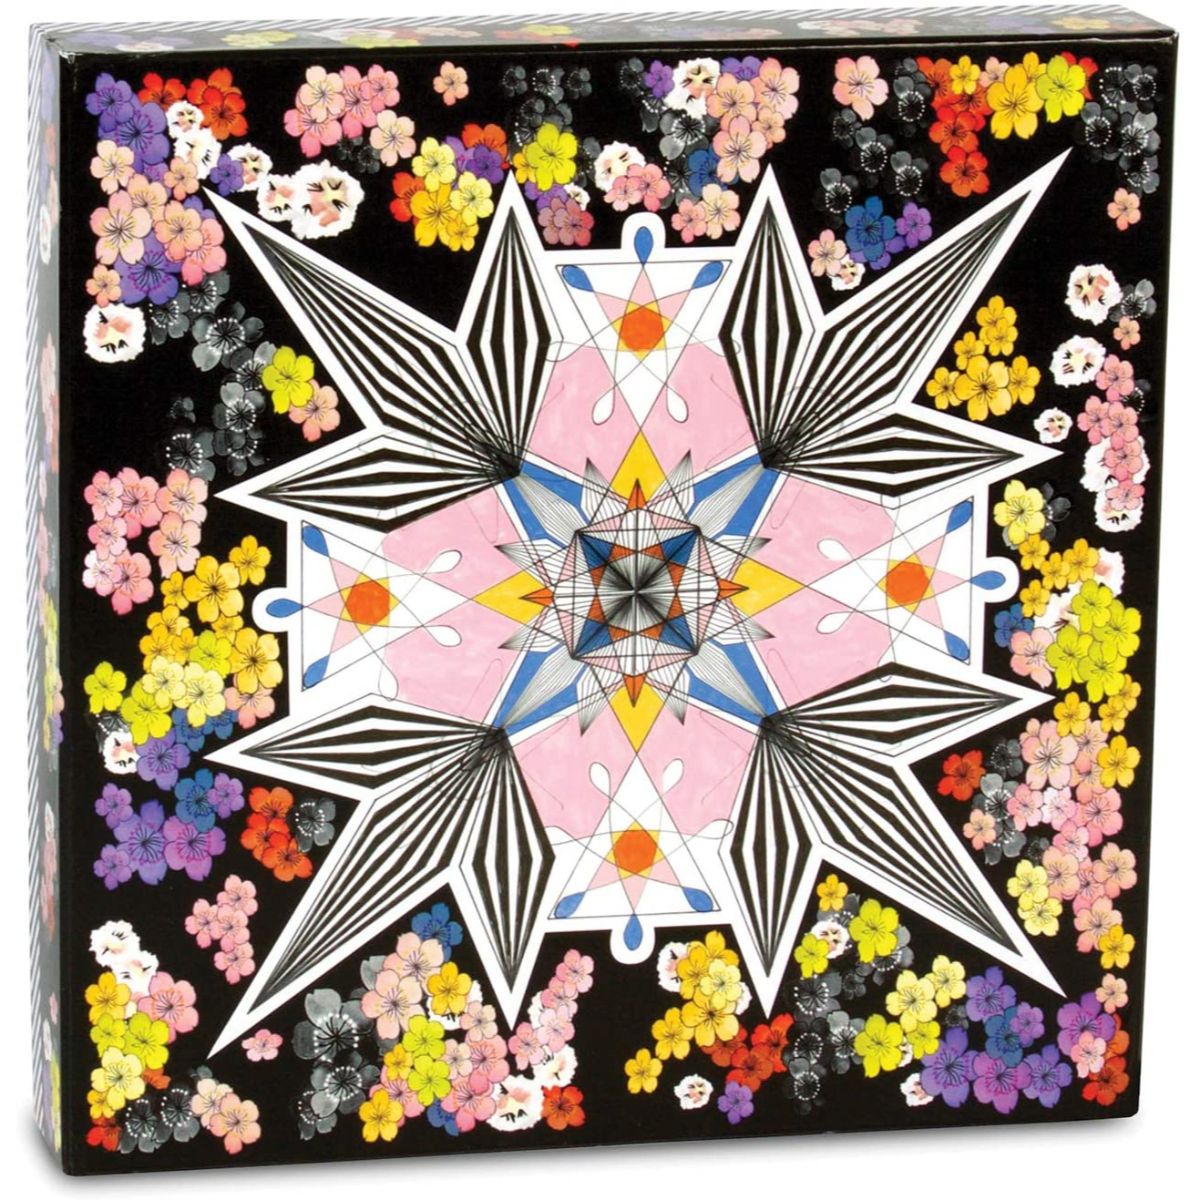 Christian Lacroix Flowers Galaxy Double-Sided Puzzle 500pcs